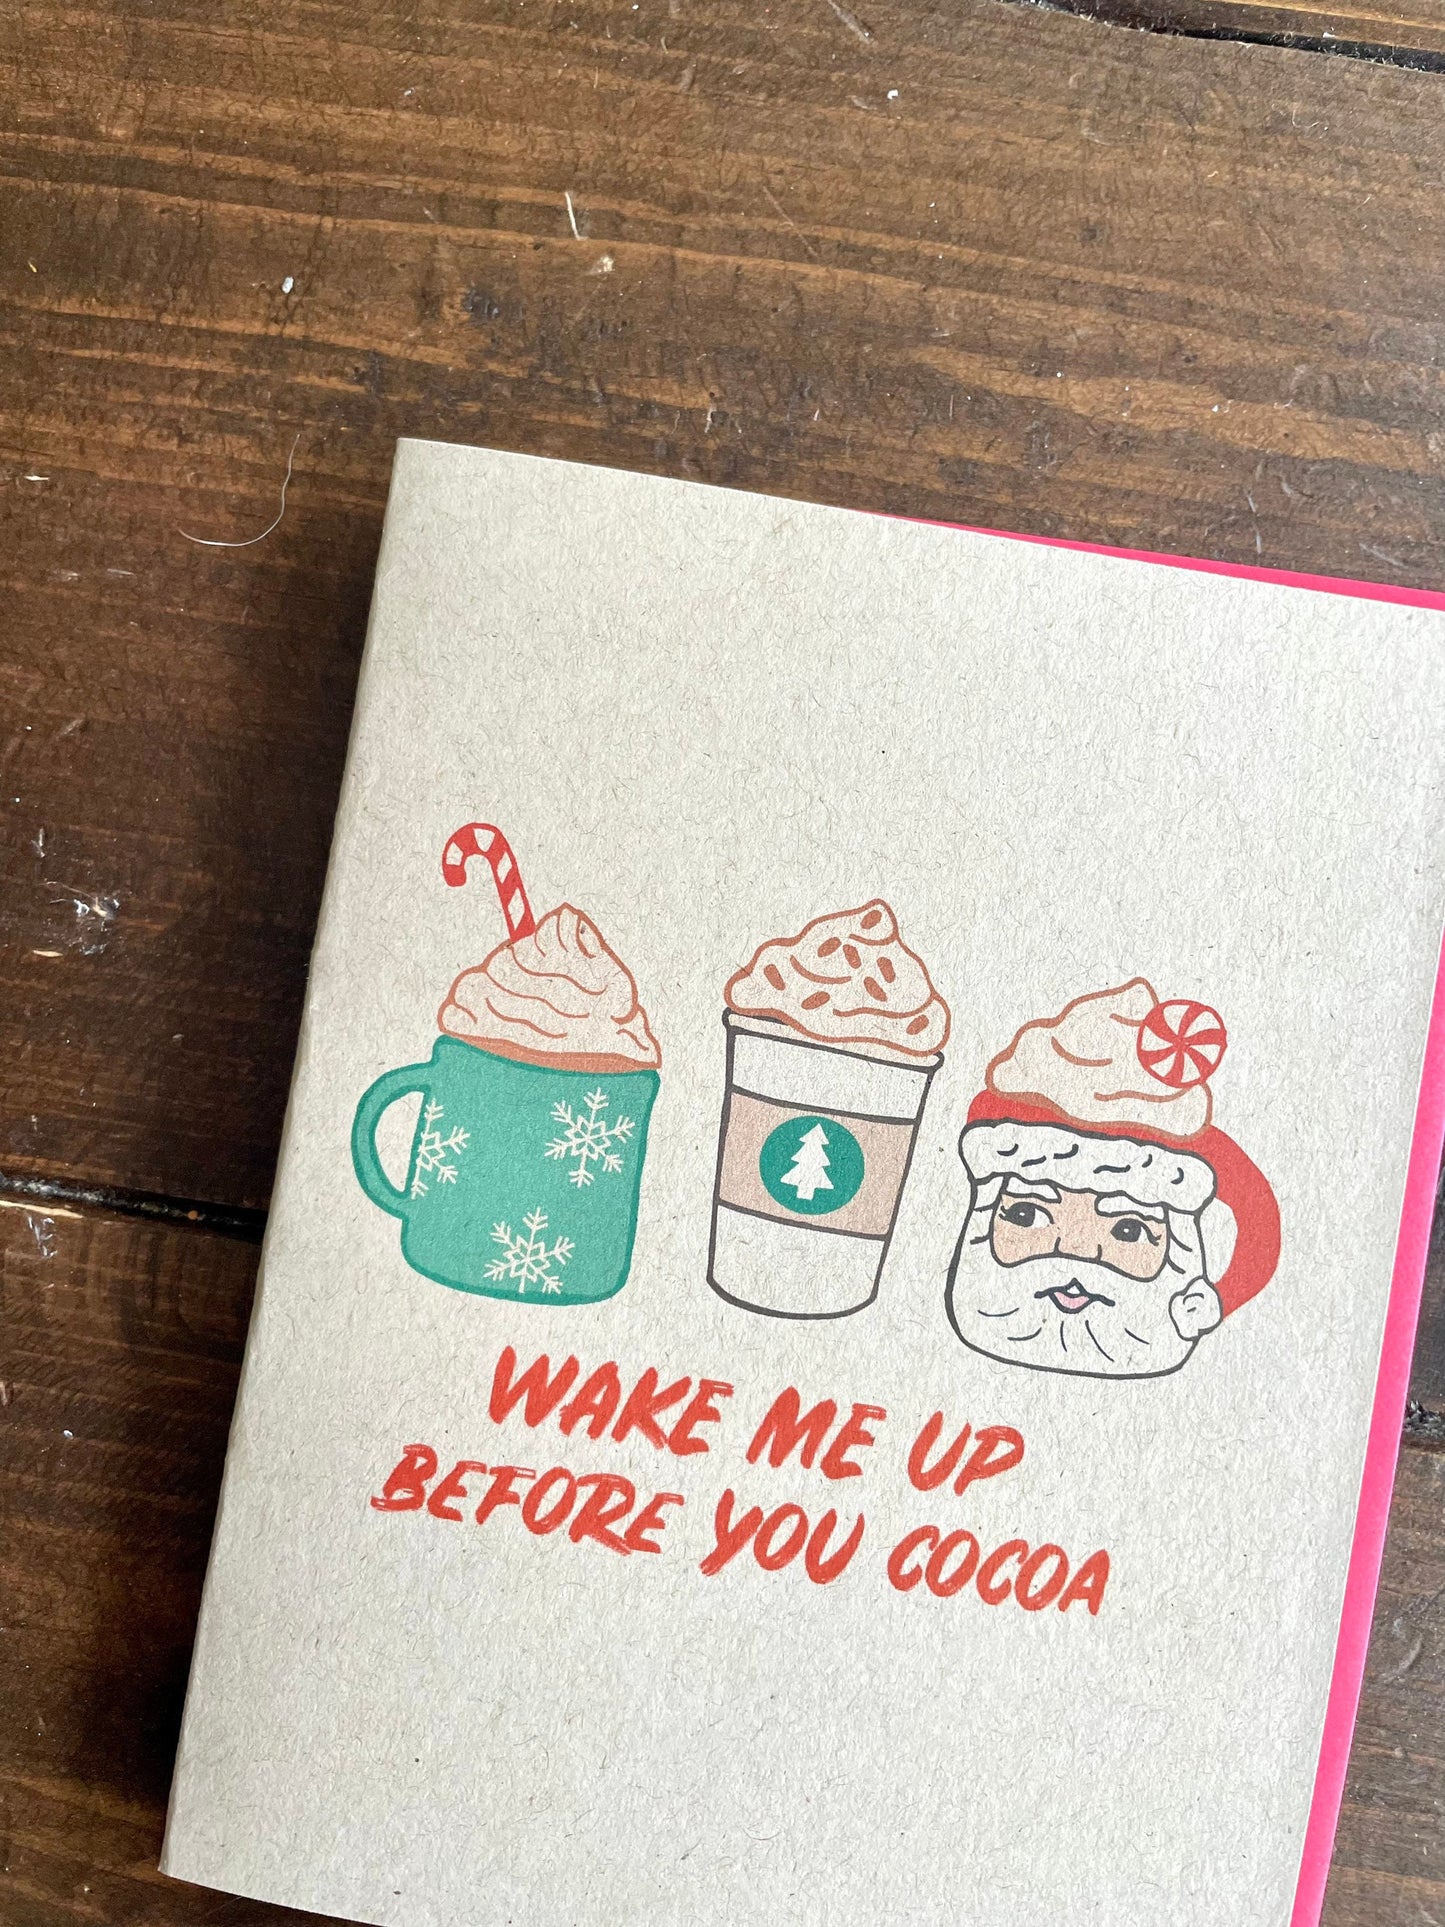 Before You Cocoa Hot Chocolate Christmas Card